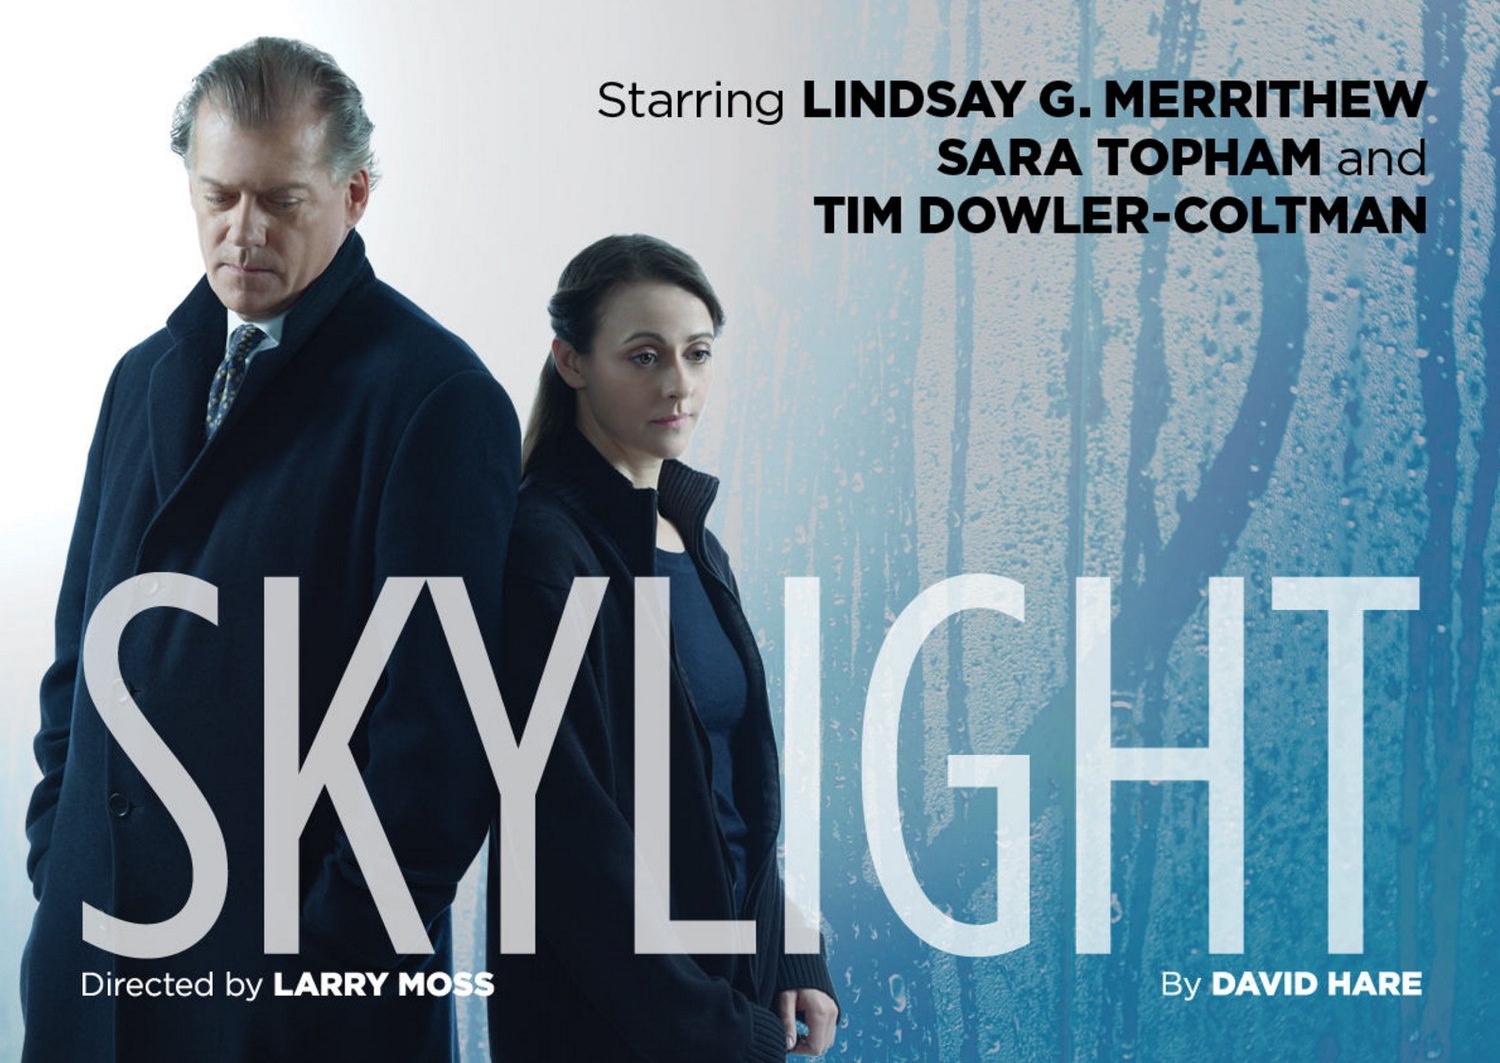 DAVID HARE’S CRITICALLY ACCLAIMED SKYLIGHT DEBUTS ON JUNE 15TH 1